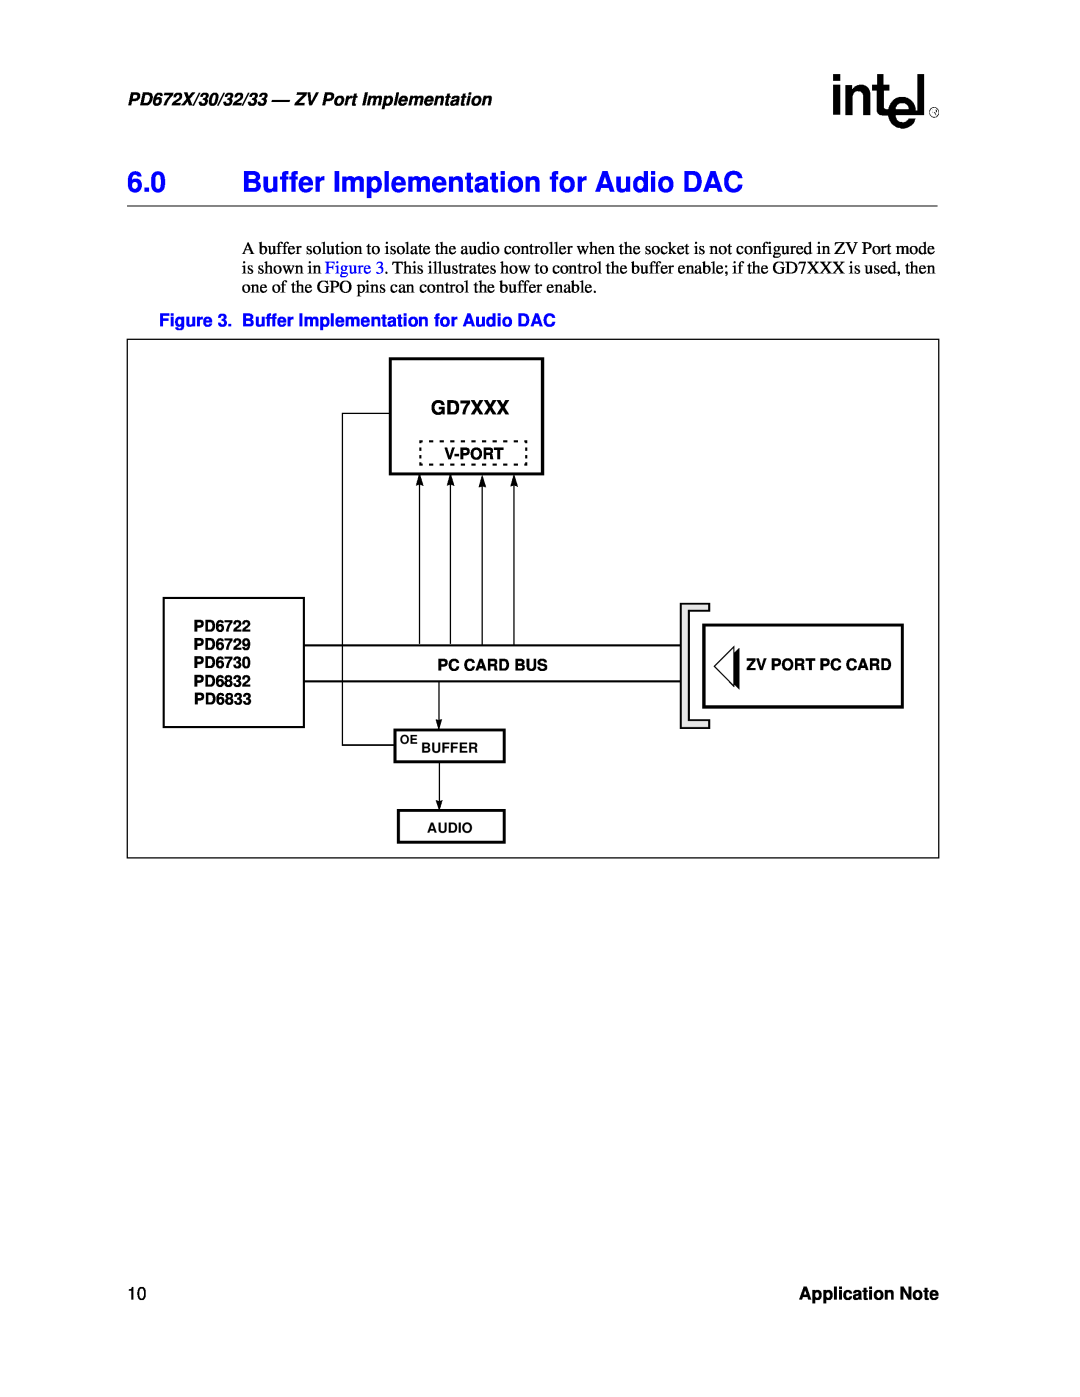 Intel manual 6.0Buffer Implementation for Audio DAC, GD7XXX, PD672X/30/32/33 - ZV Port Implementation, Application Note 